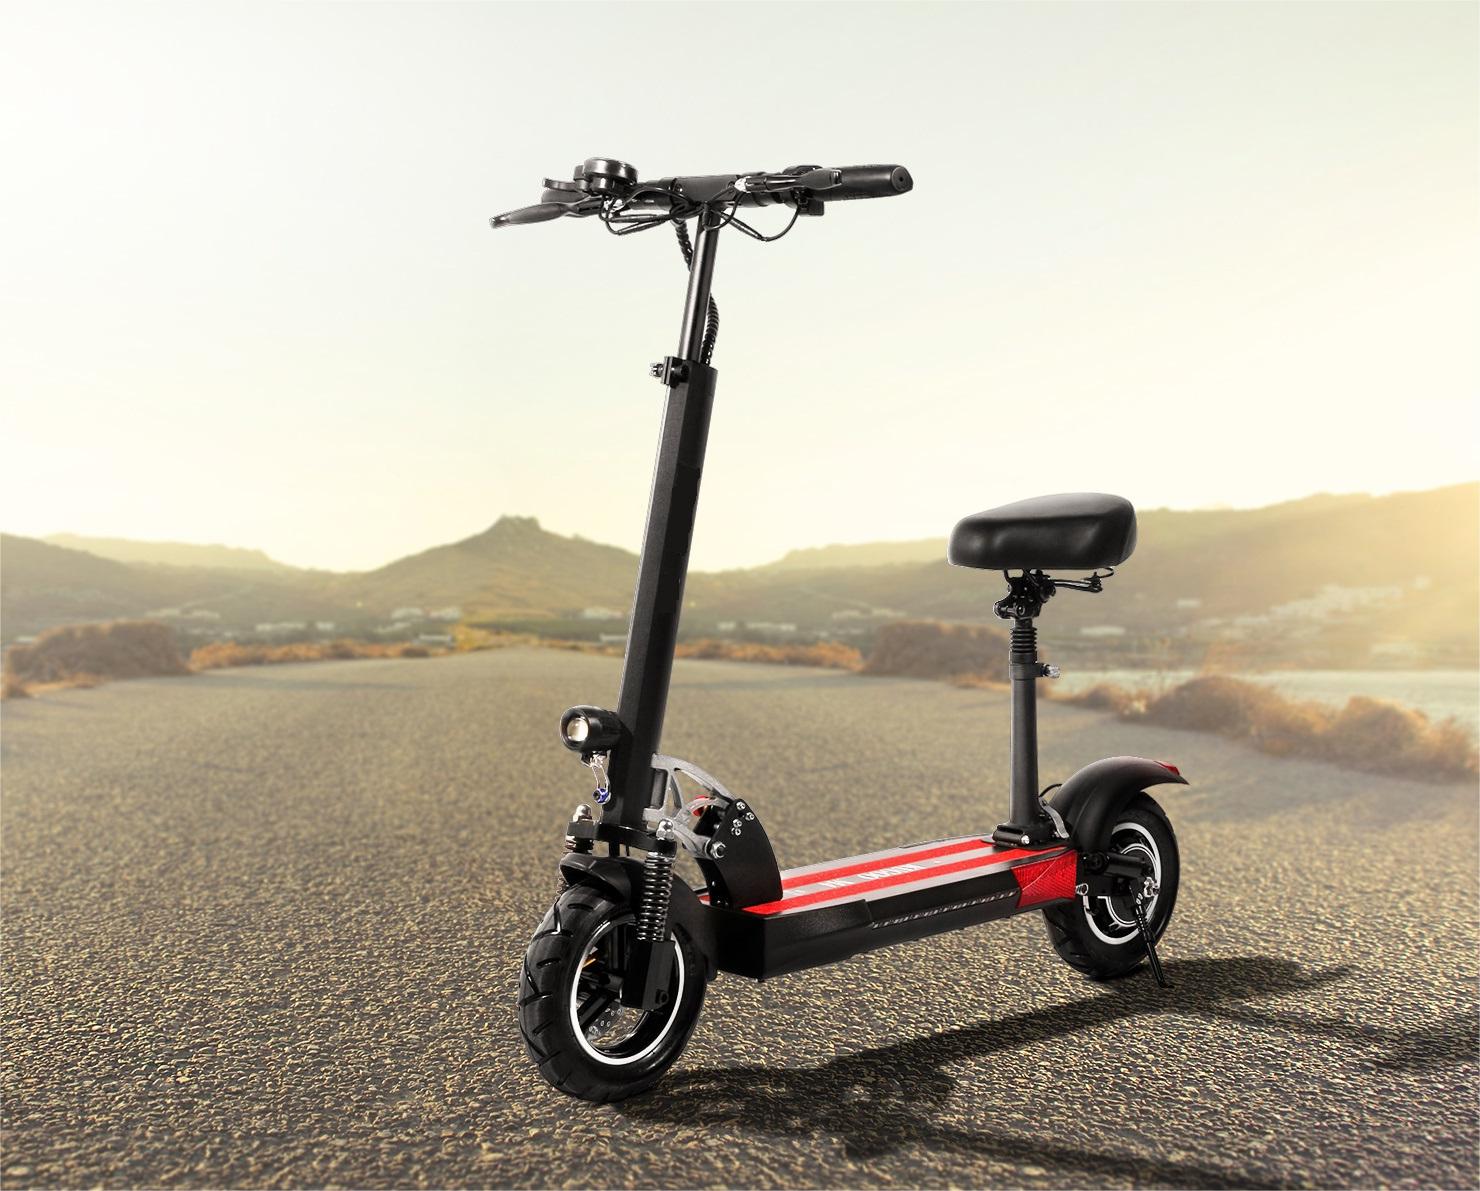 Several other considerations for the selection of electric scooters